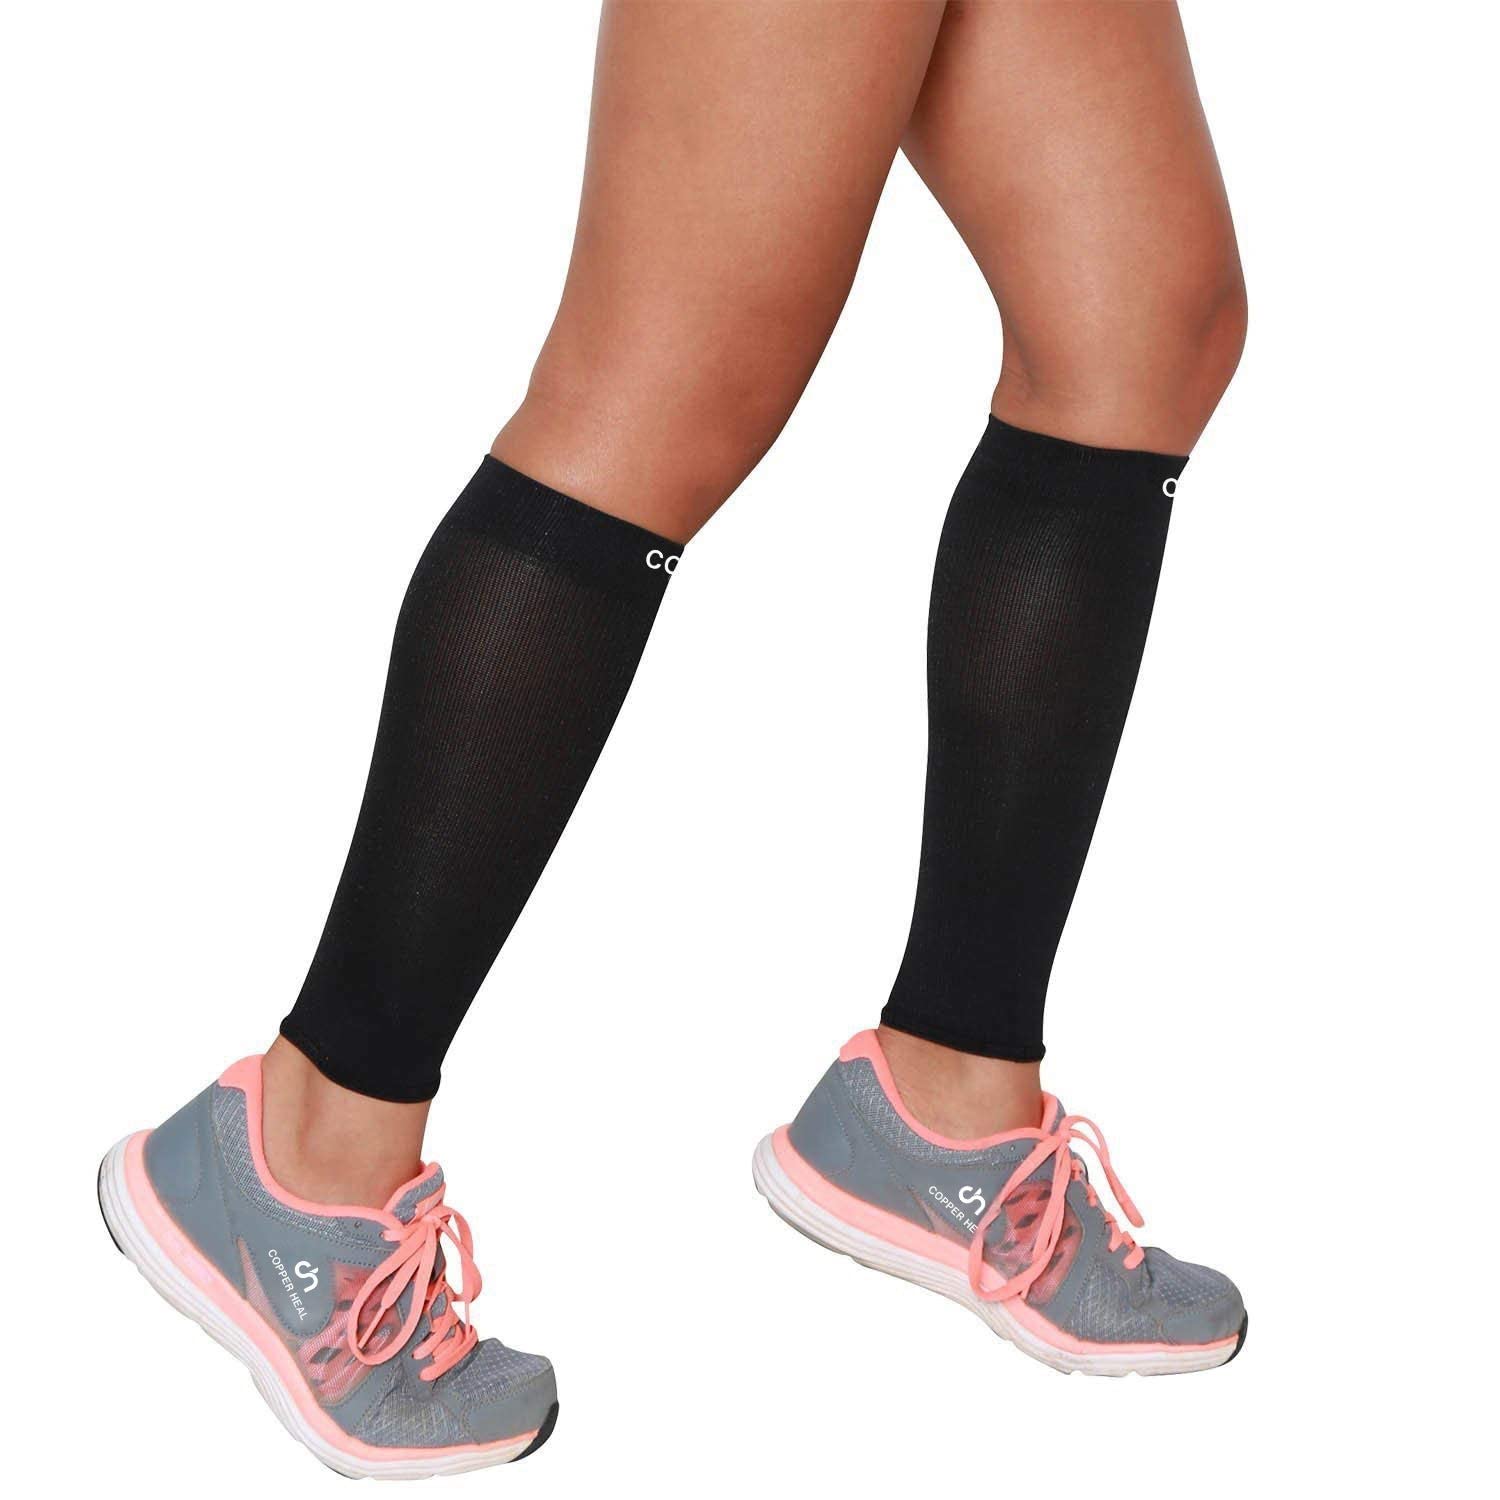 Tommie Copper Sport Compression Knee High Socks, Black, Large/Extra-Large,  2 Count per Pack